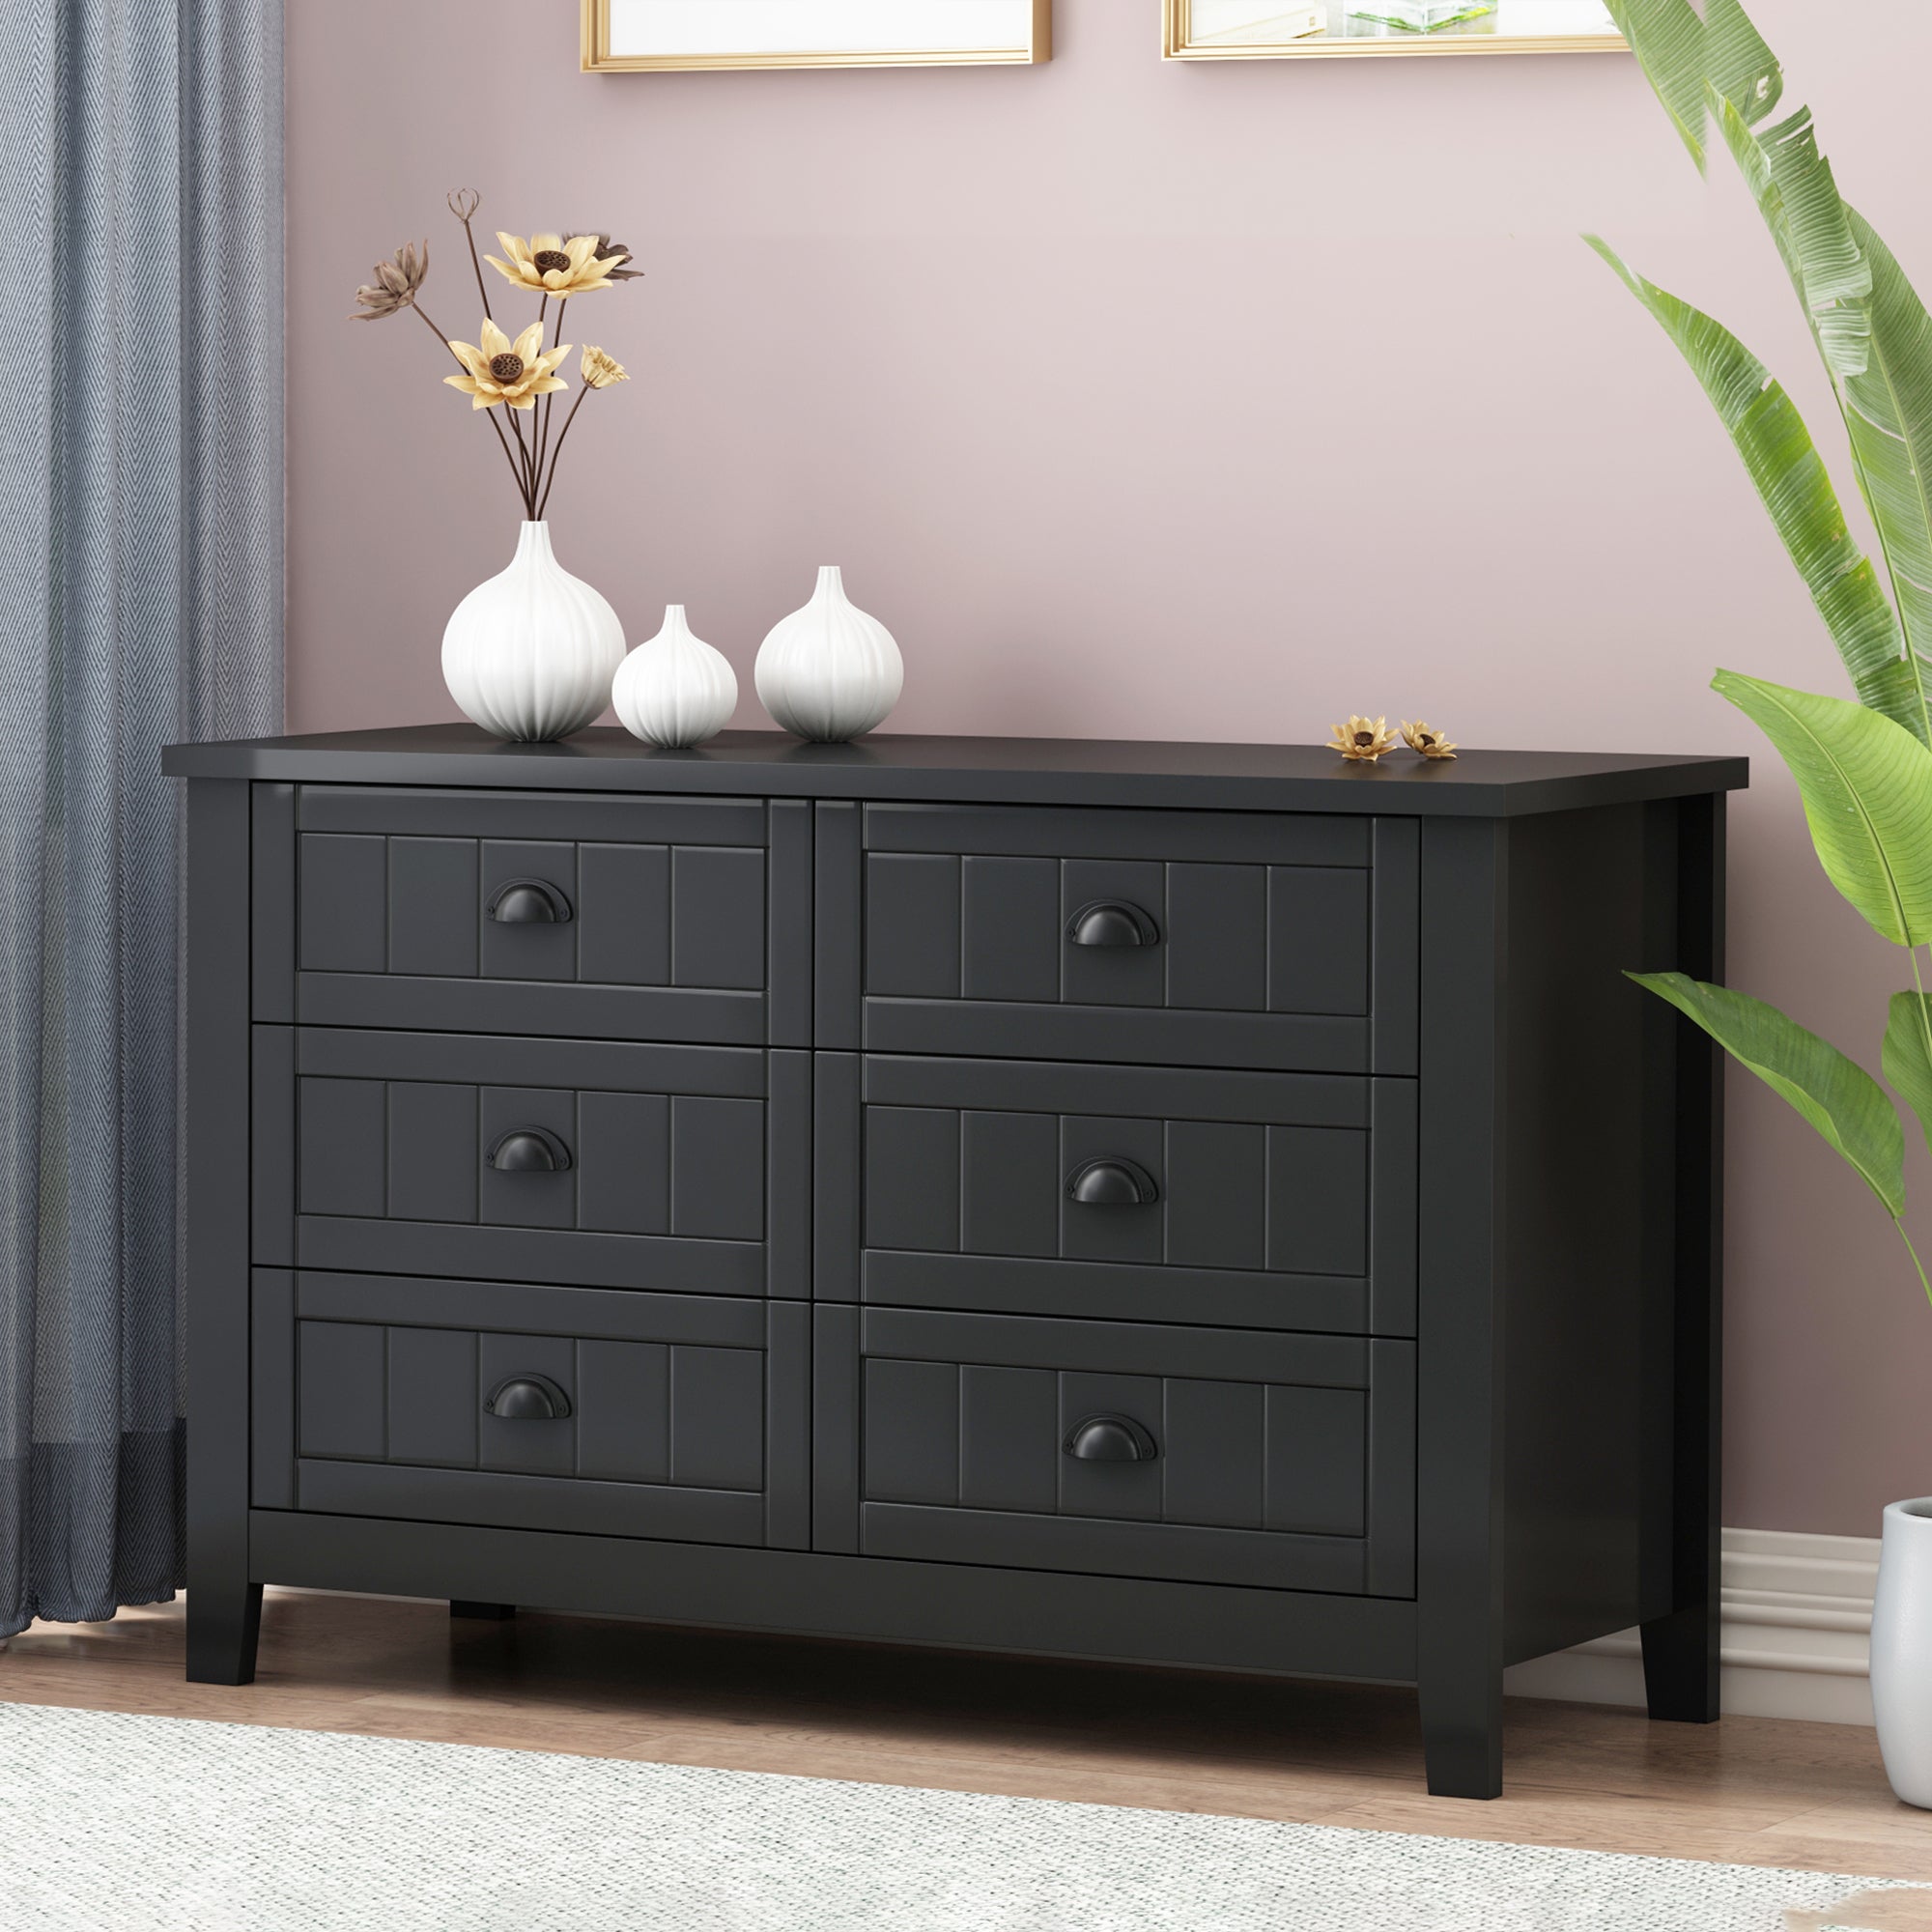 🆓🚛 Drawer Dresser Bar Cabinet Side Cabinet, Buffet Sideboard, Buffet Service Counter, Solid Wood Frame, Plasticdoor Panel, Retro Shell Handle, Applicable To Dining Room, Living Room, Kitchen, Corridor, Black